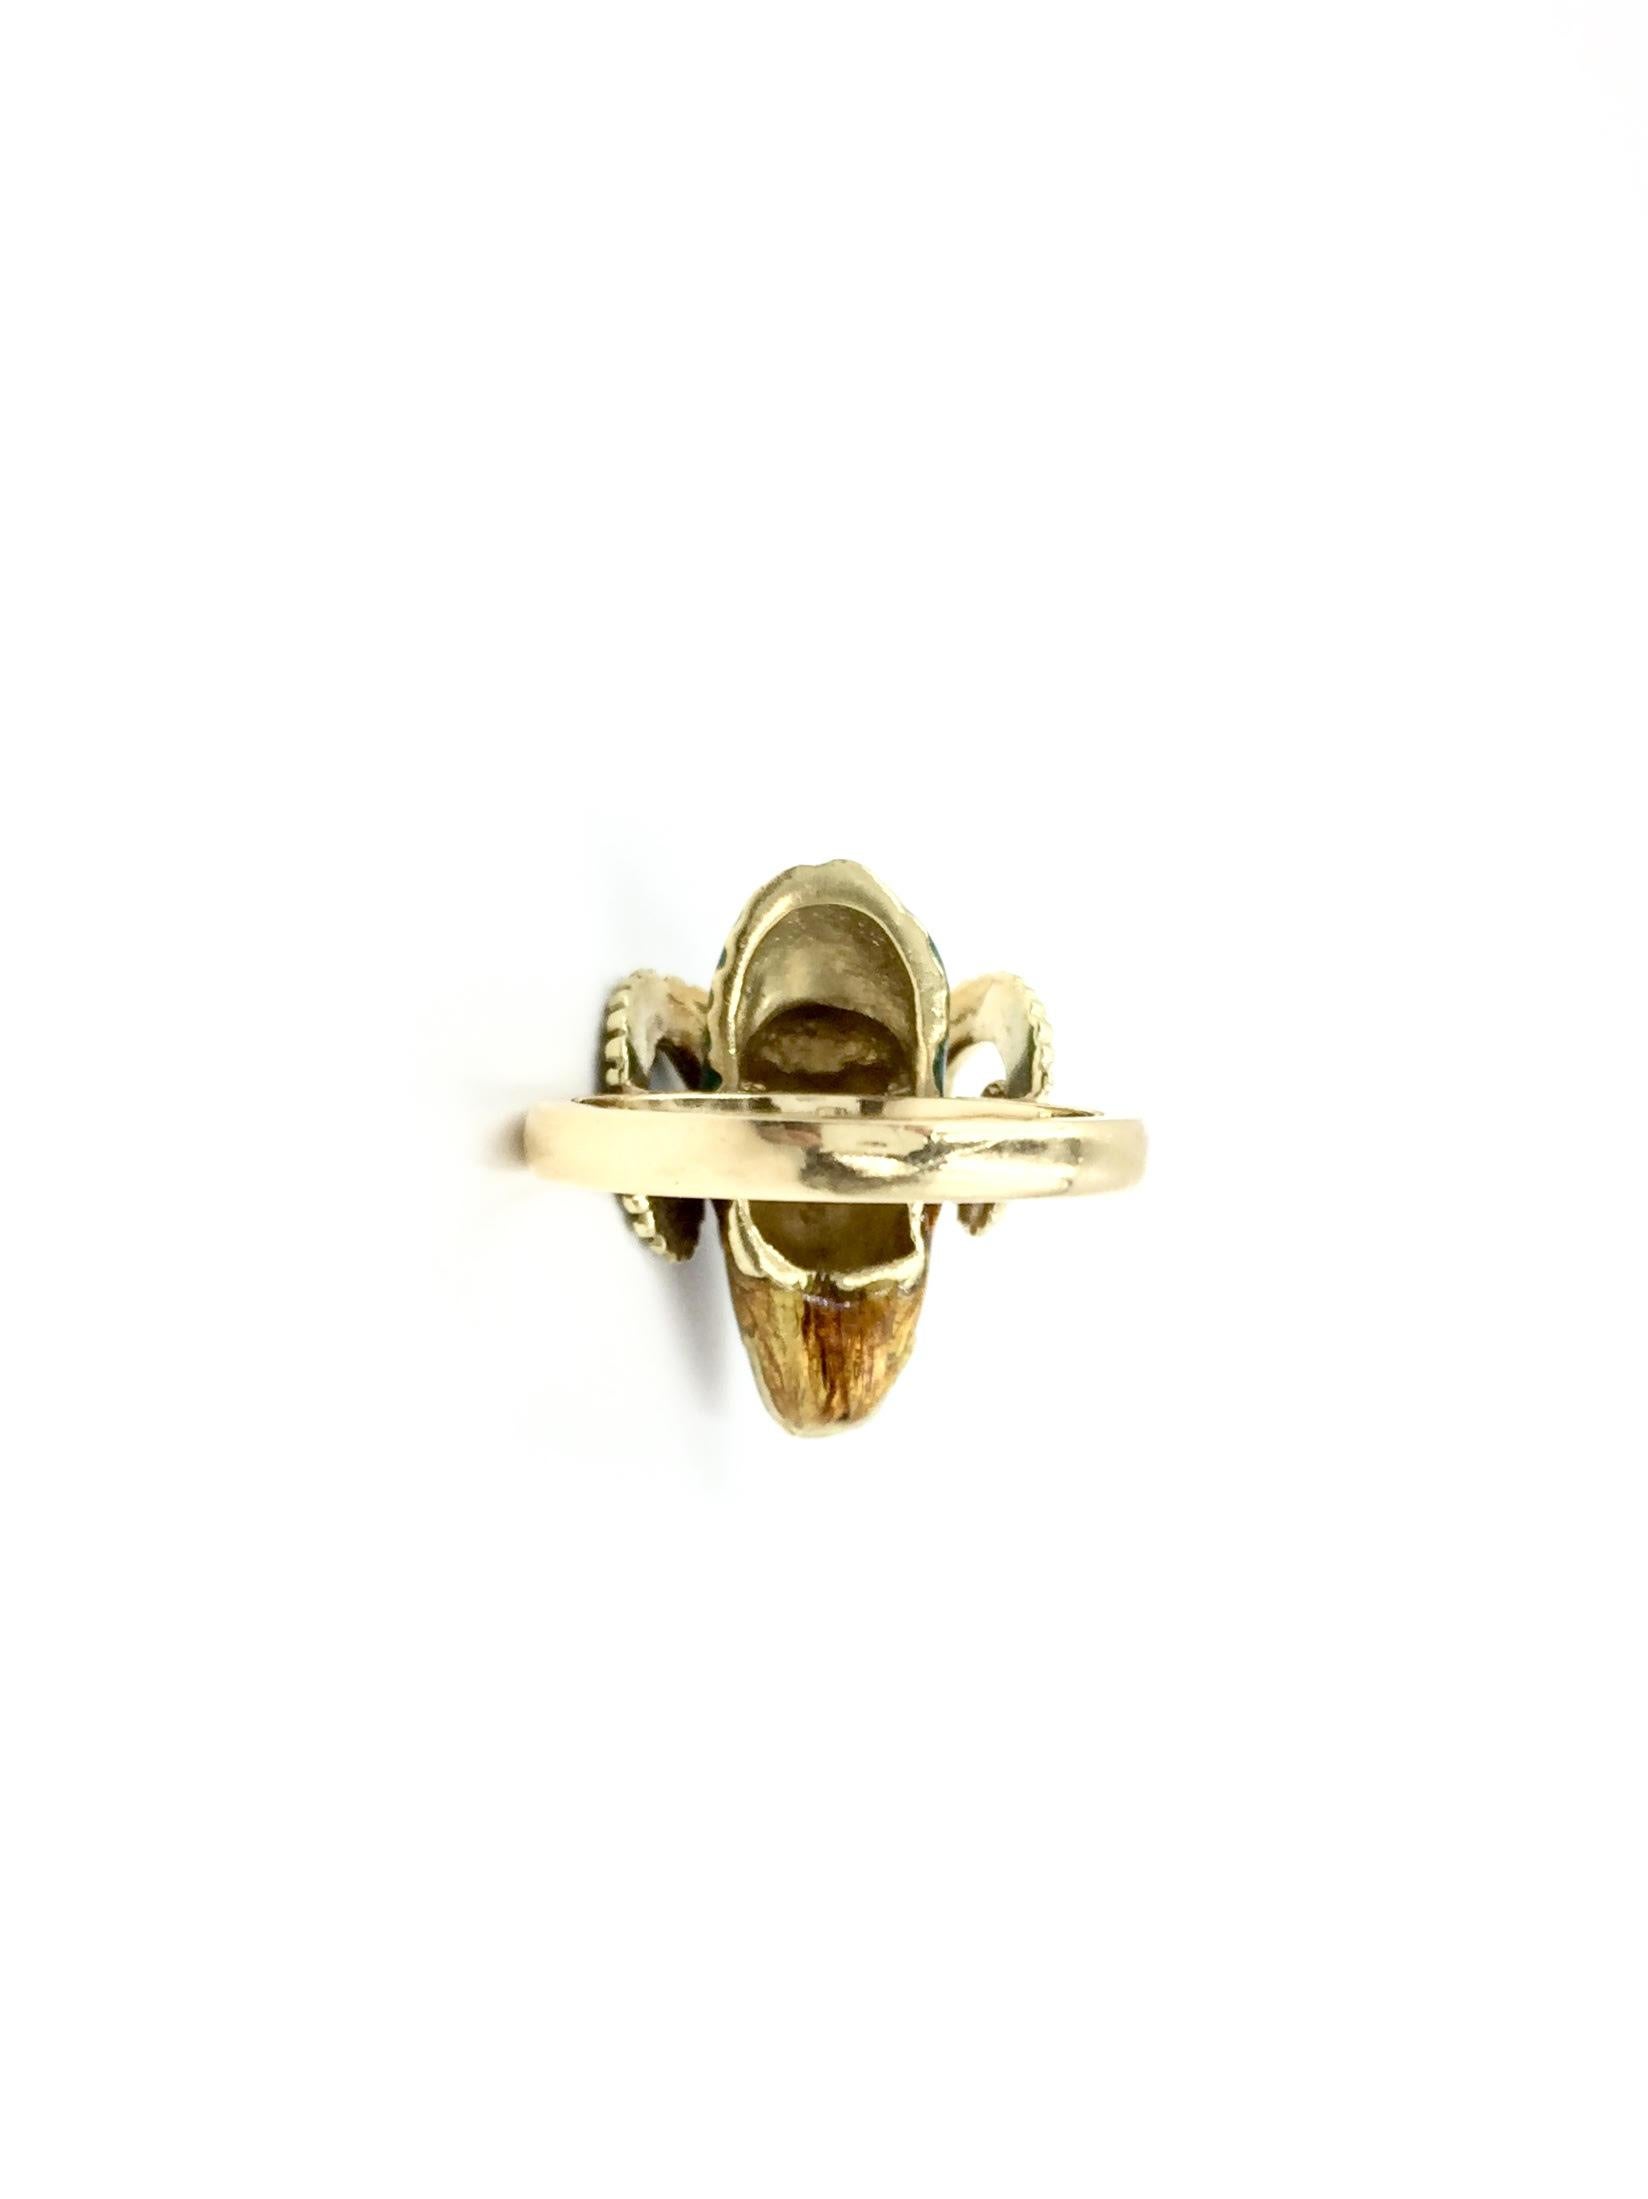 Enamel and 18 Karat Ram Head Ring, circa 1960s In Good Condition For Sale In Pikesville, MD